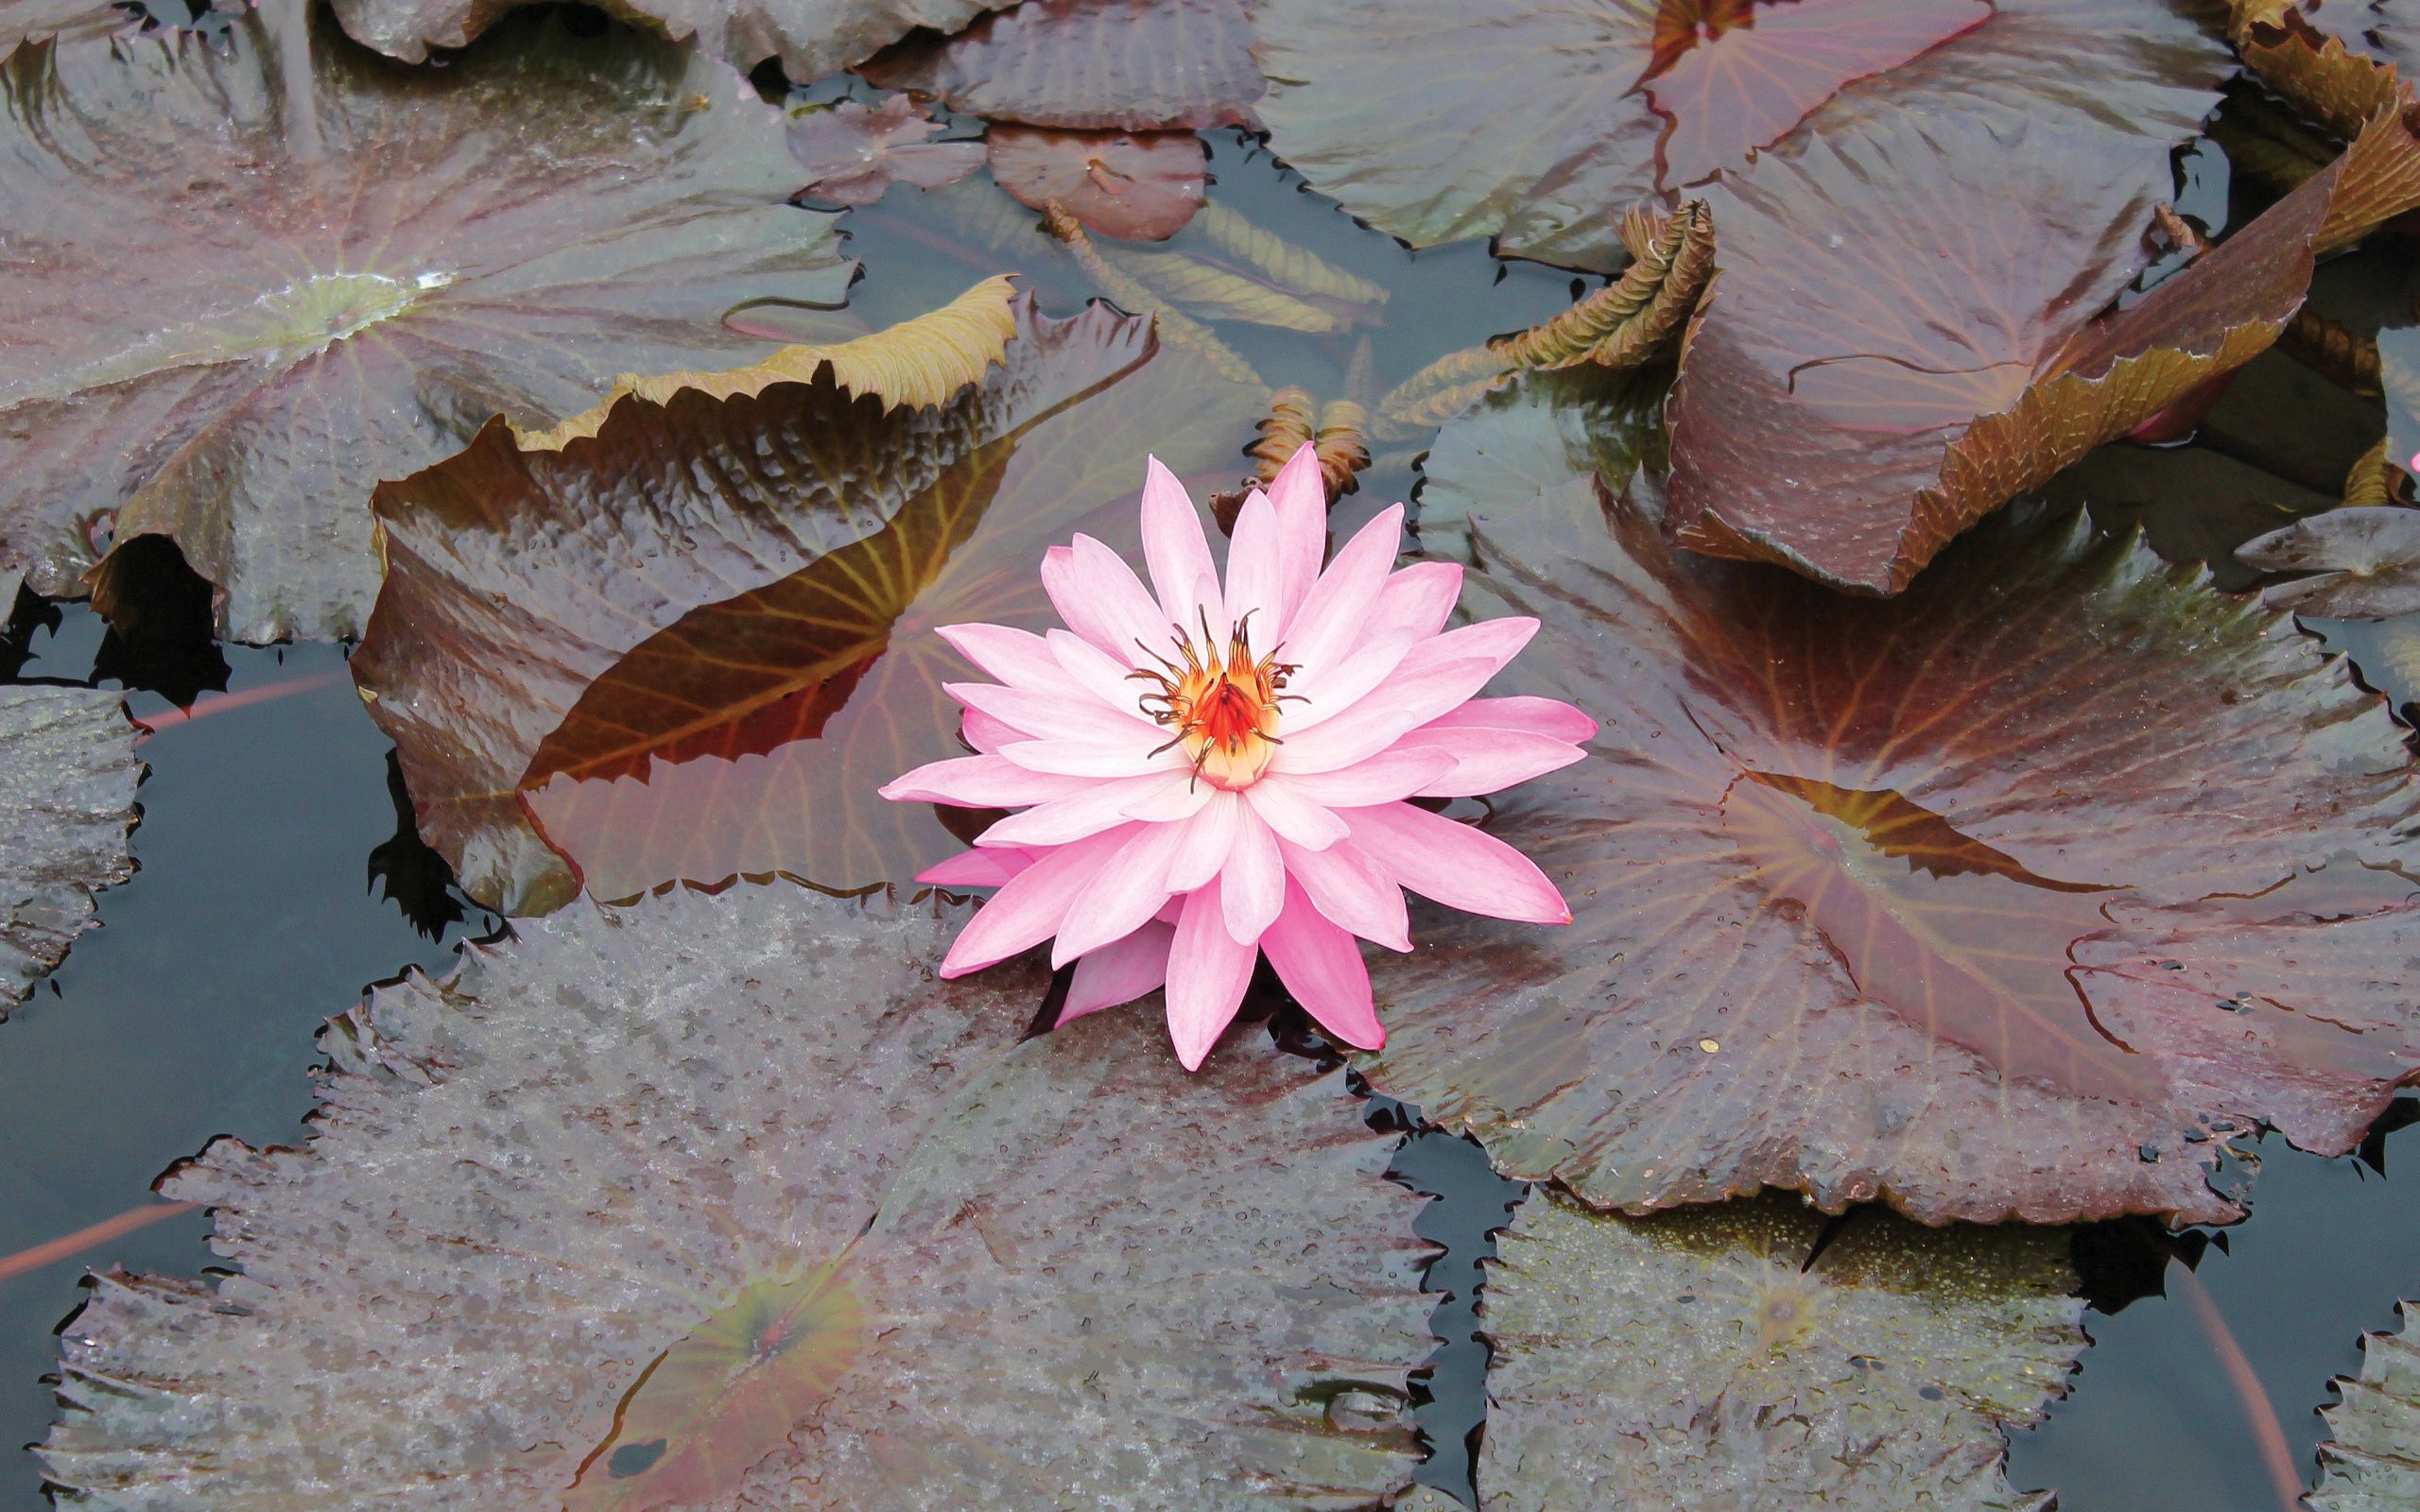 151352 download wallpaper swamp, flowers, water, leaves, pink, beauty, water lily screensavers and pictures for free